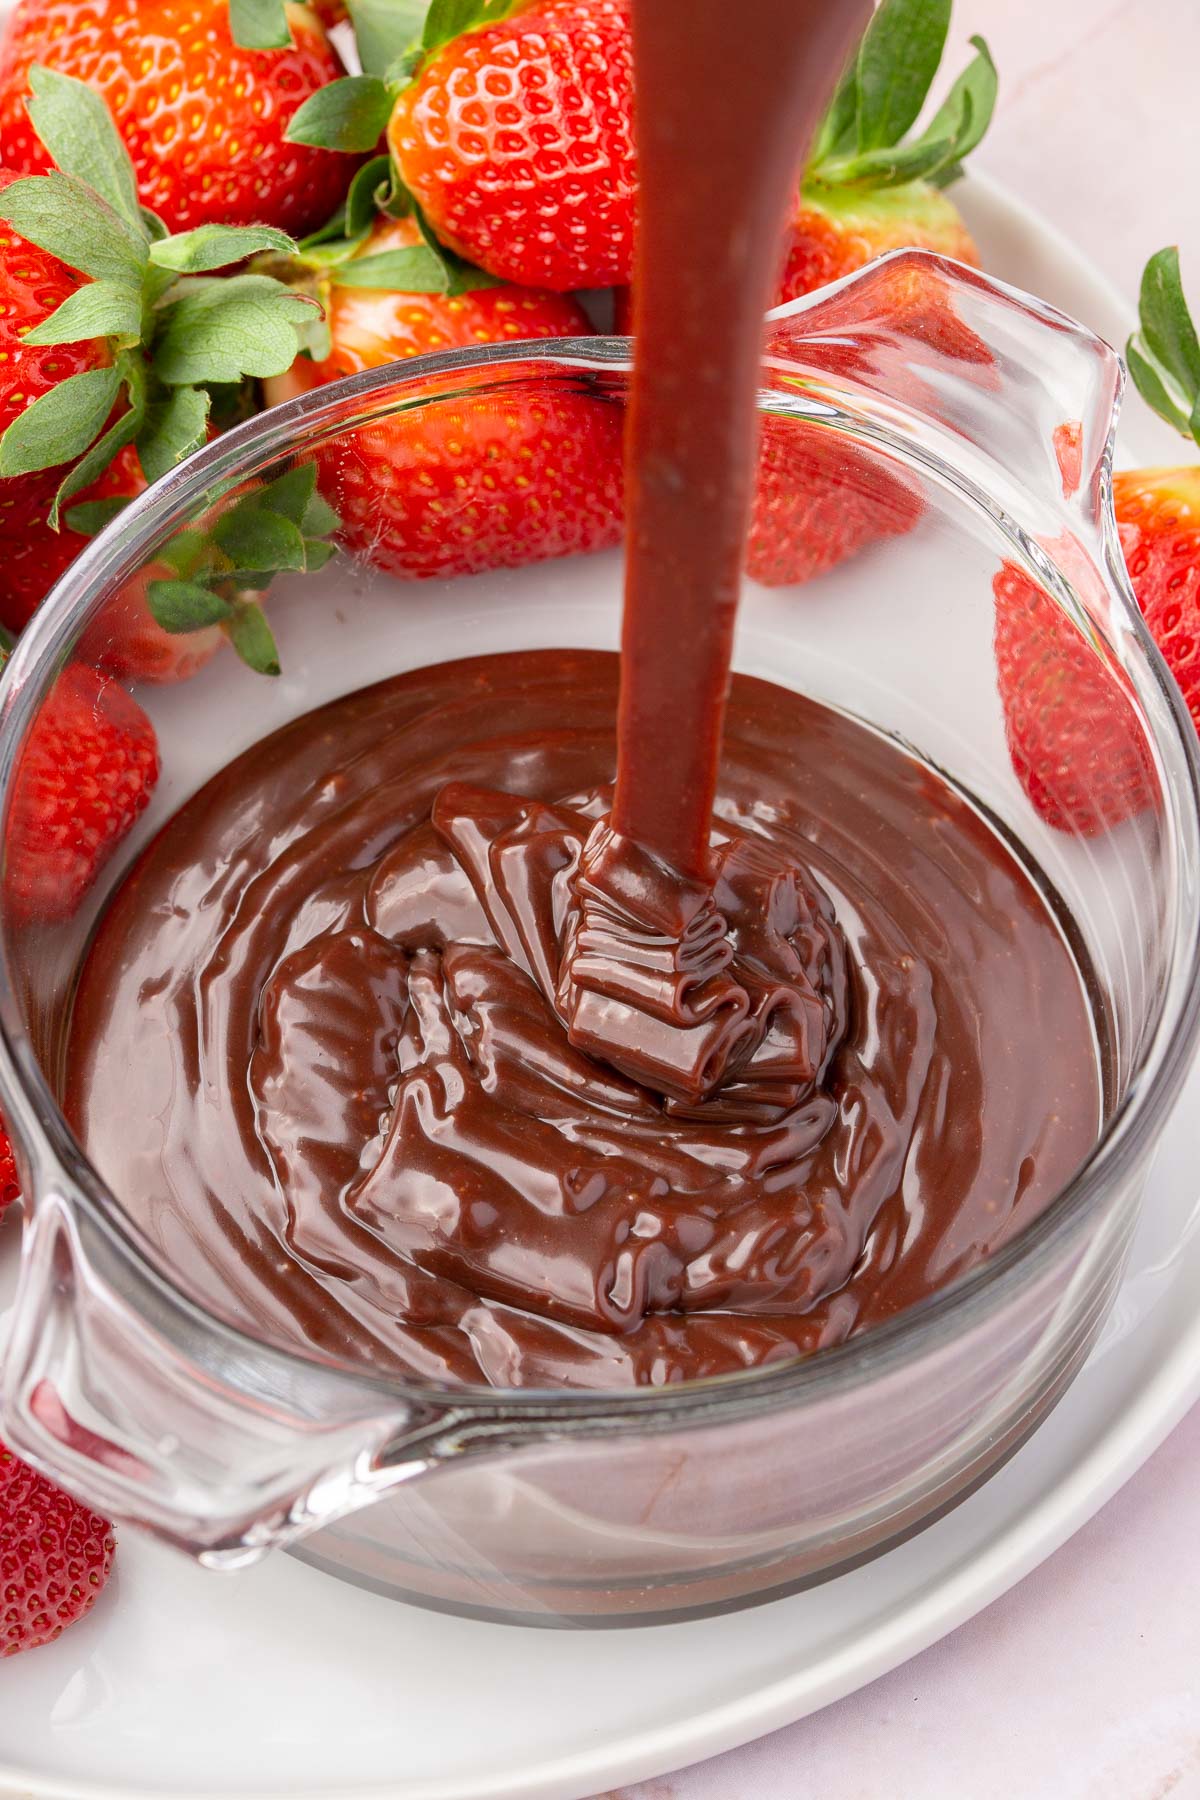 Nutella ganache being drizzled into a glass ramekin on a plate of fresh strawberries.